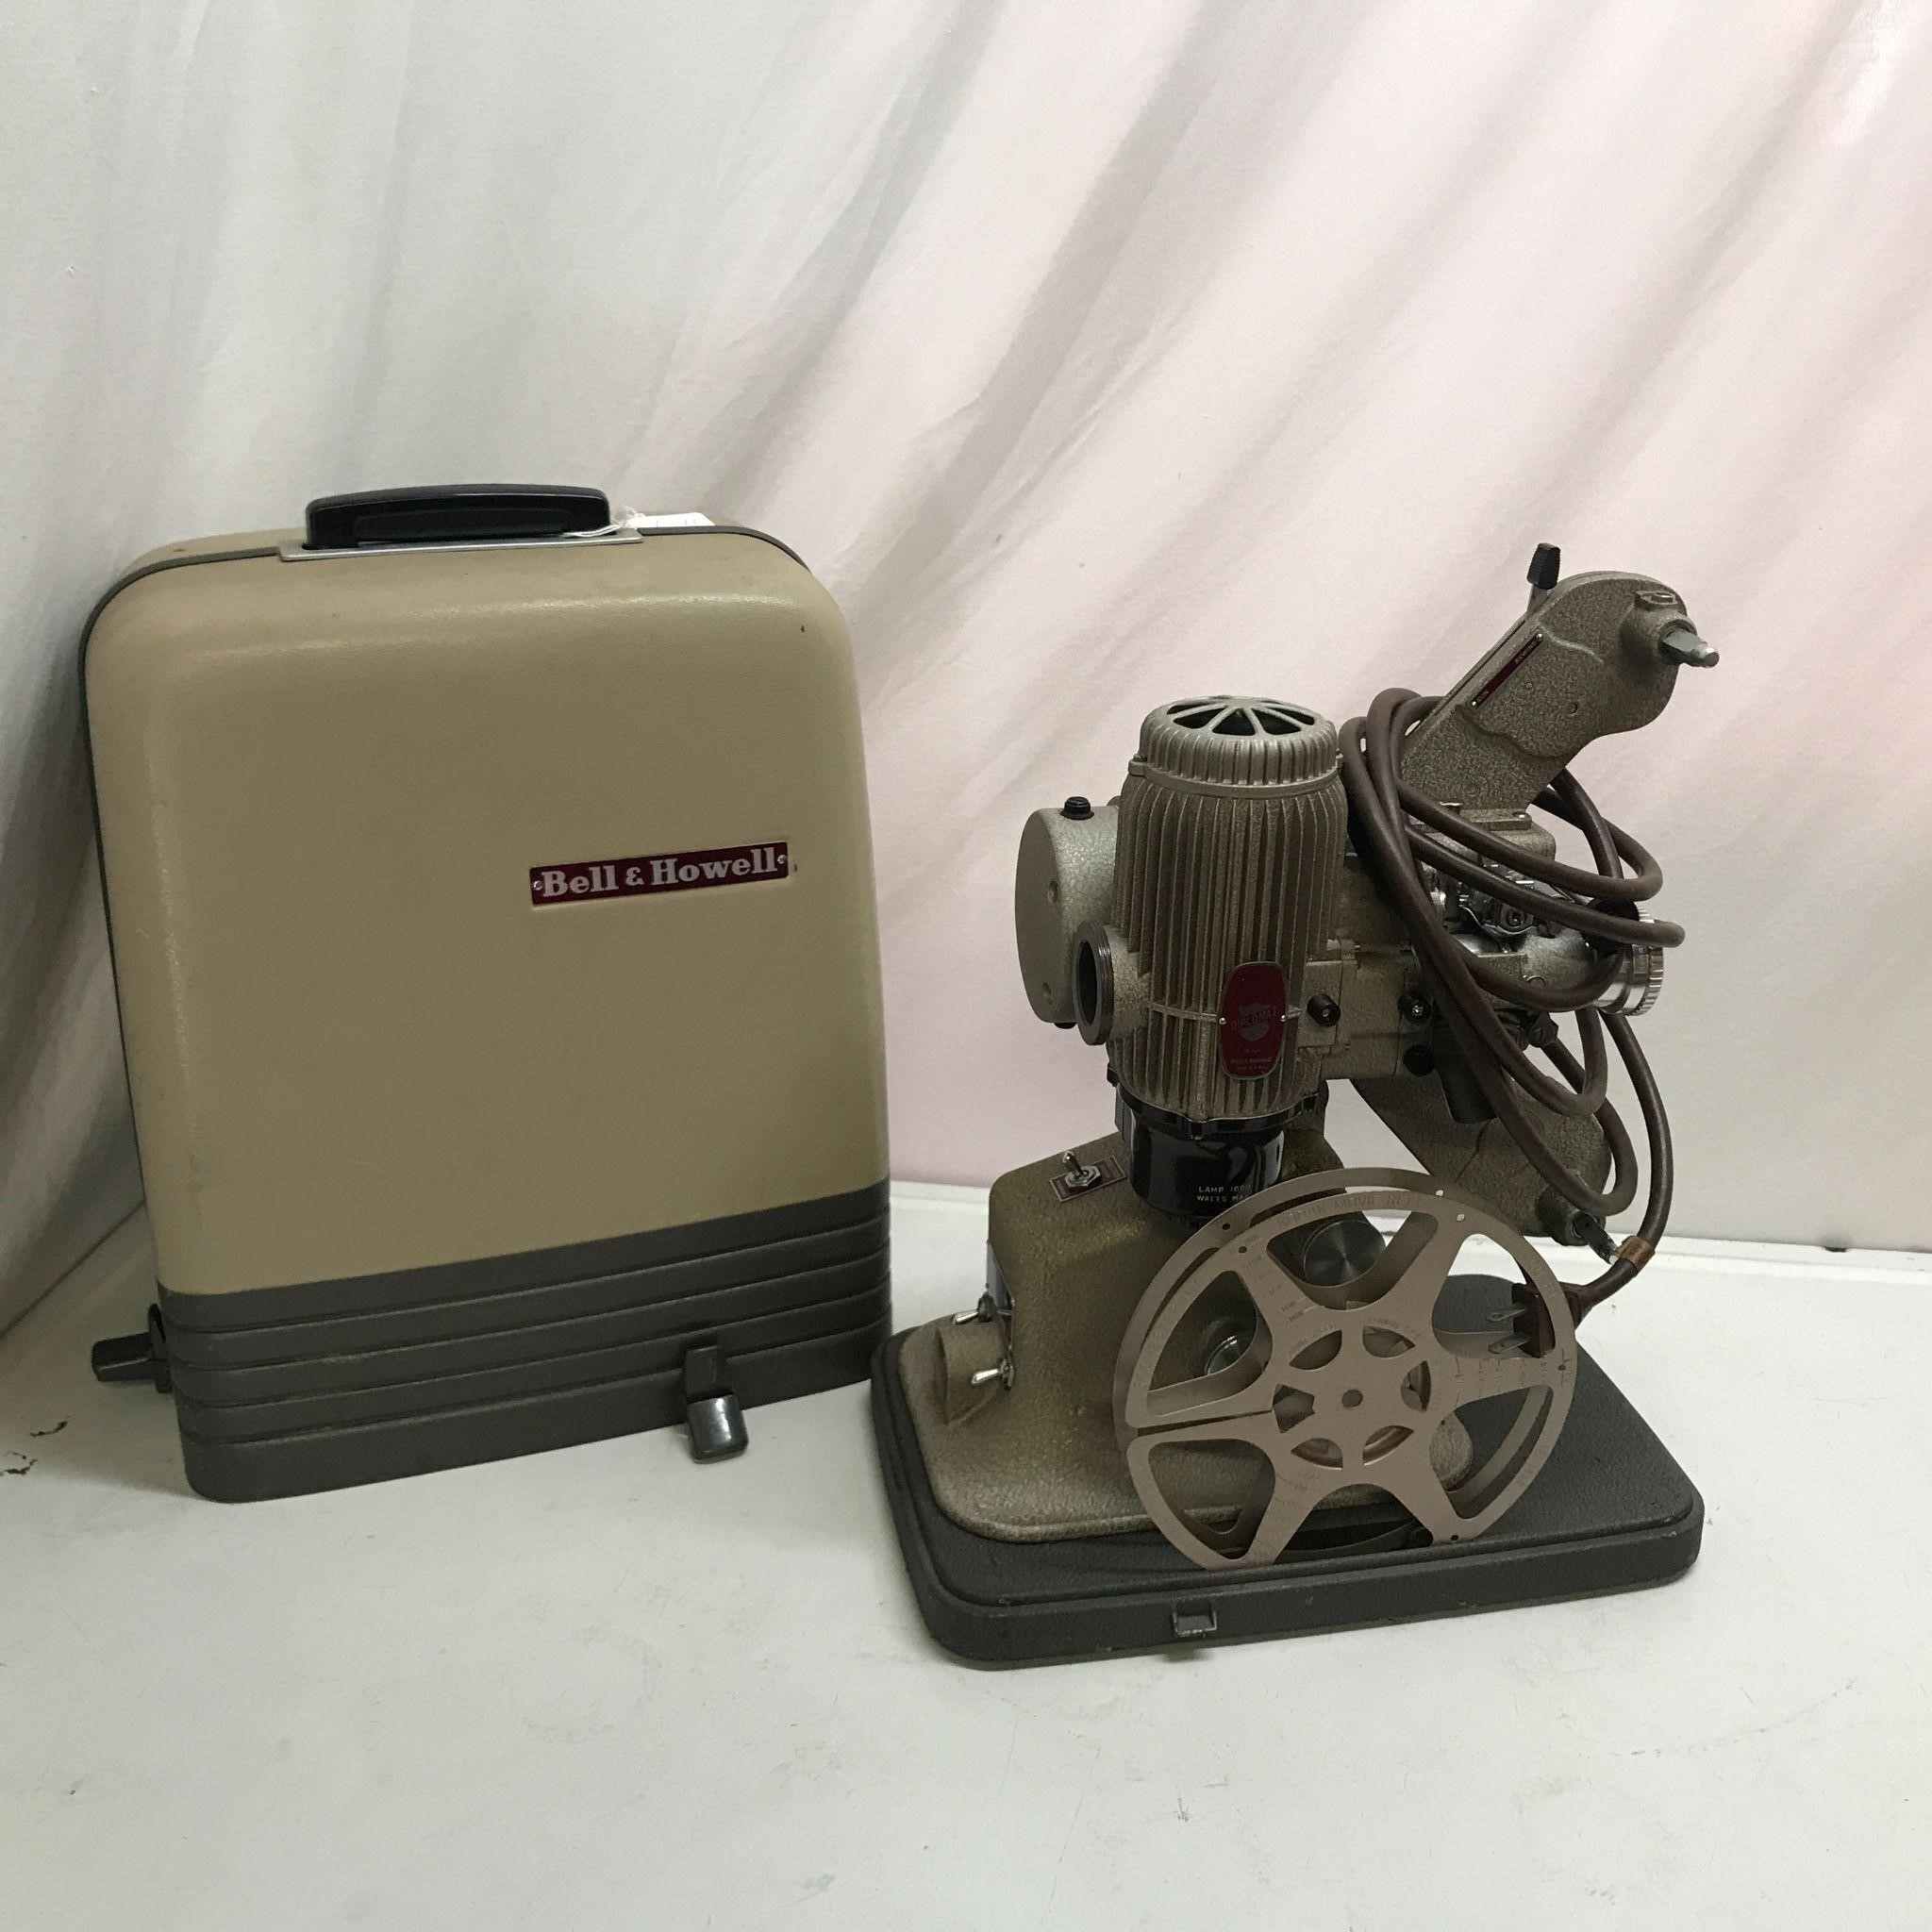 Bell & Howell Diplomat 16mm Projector